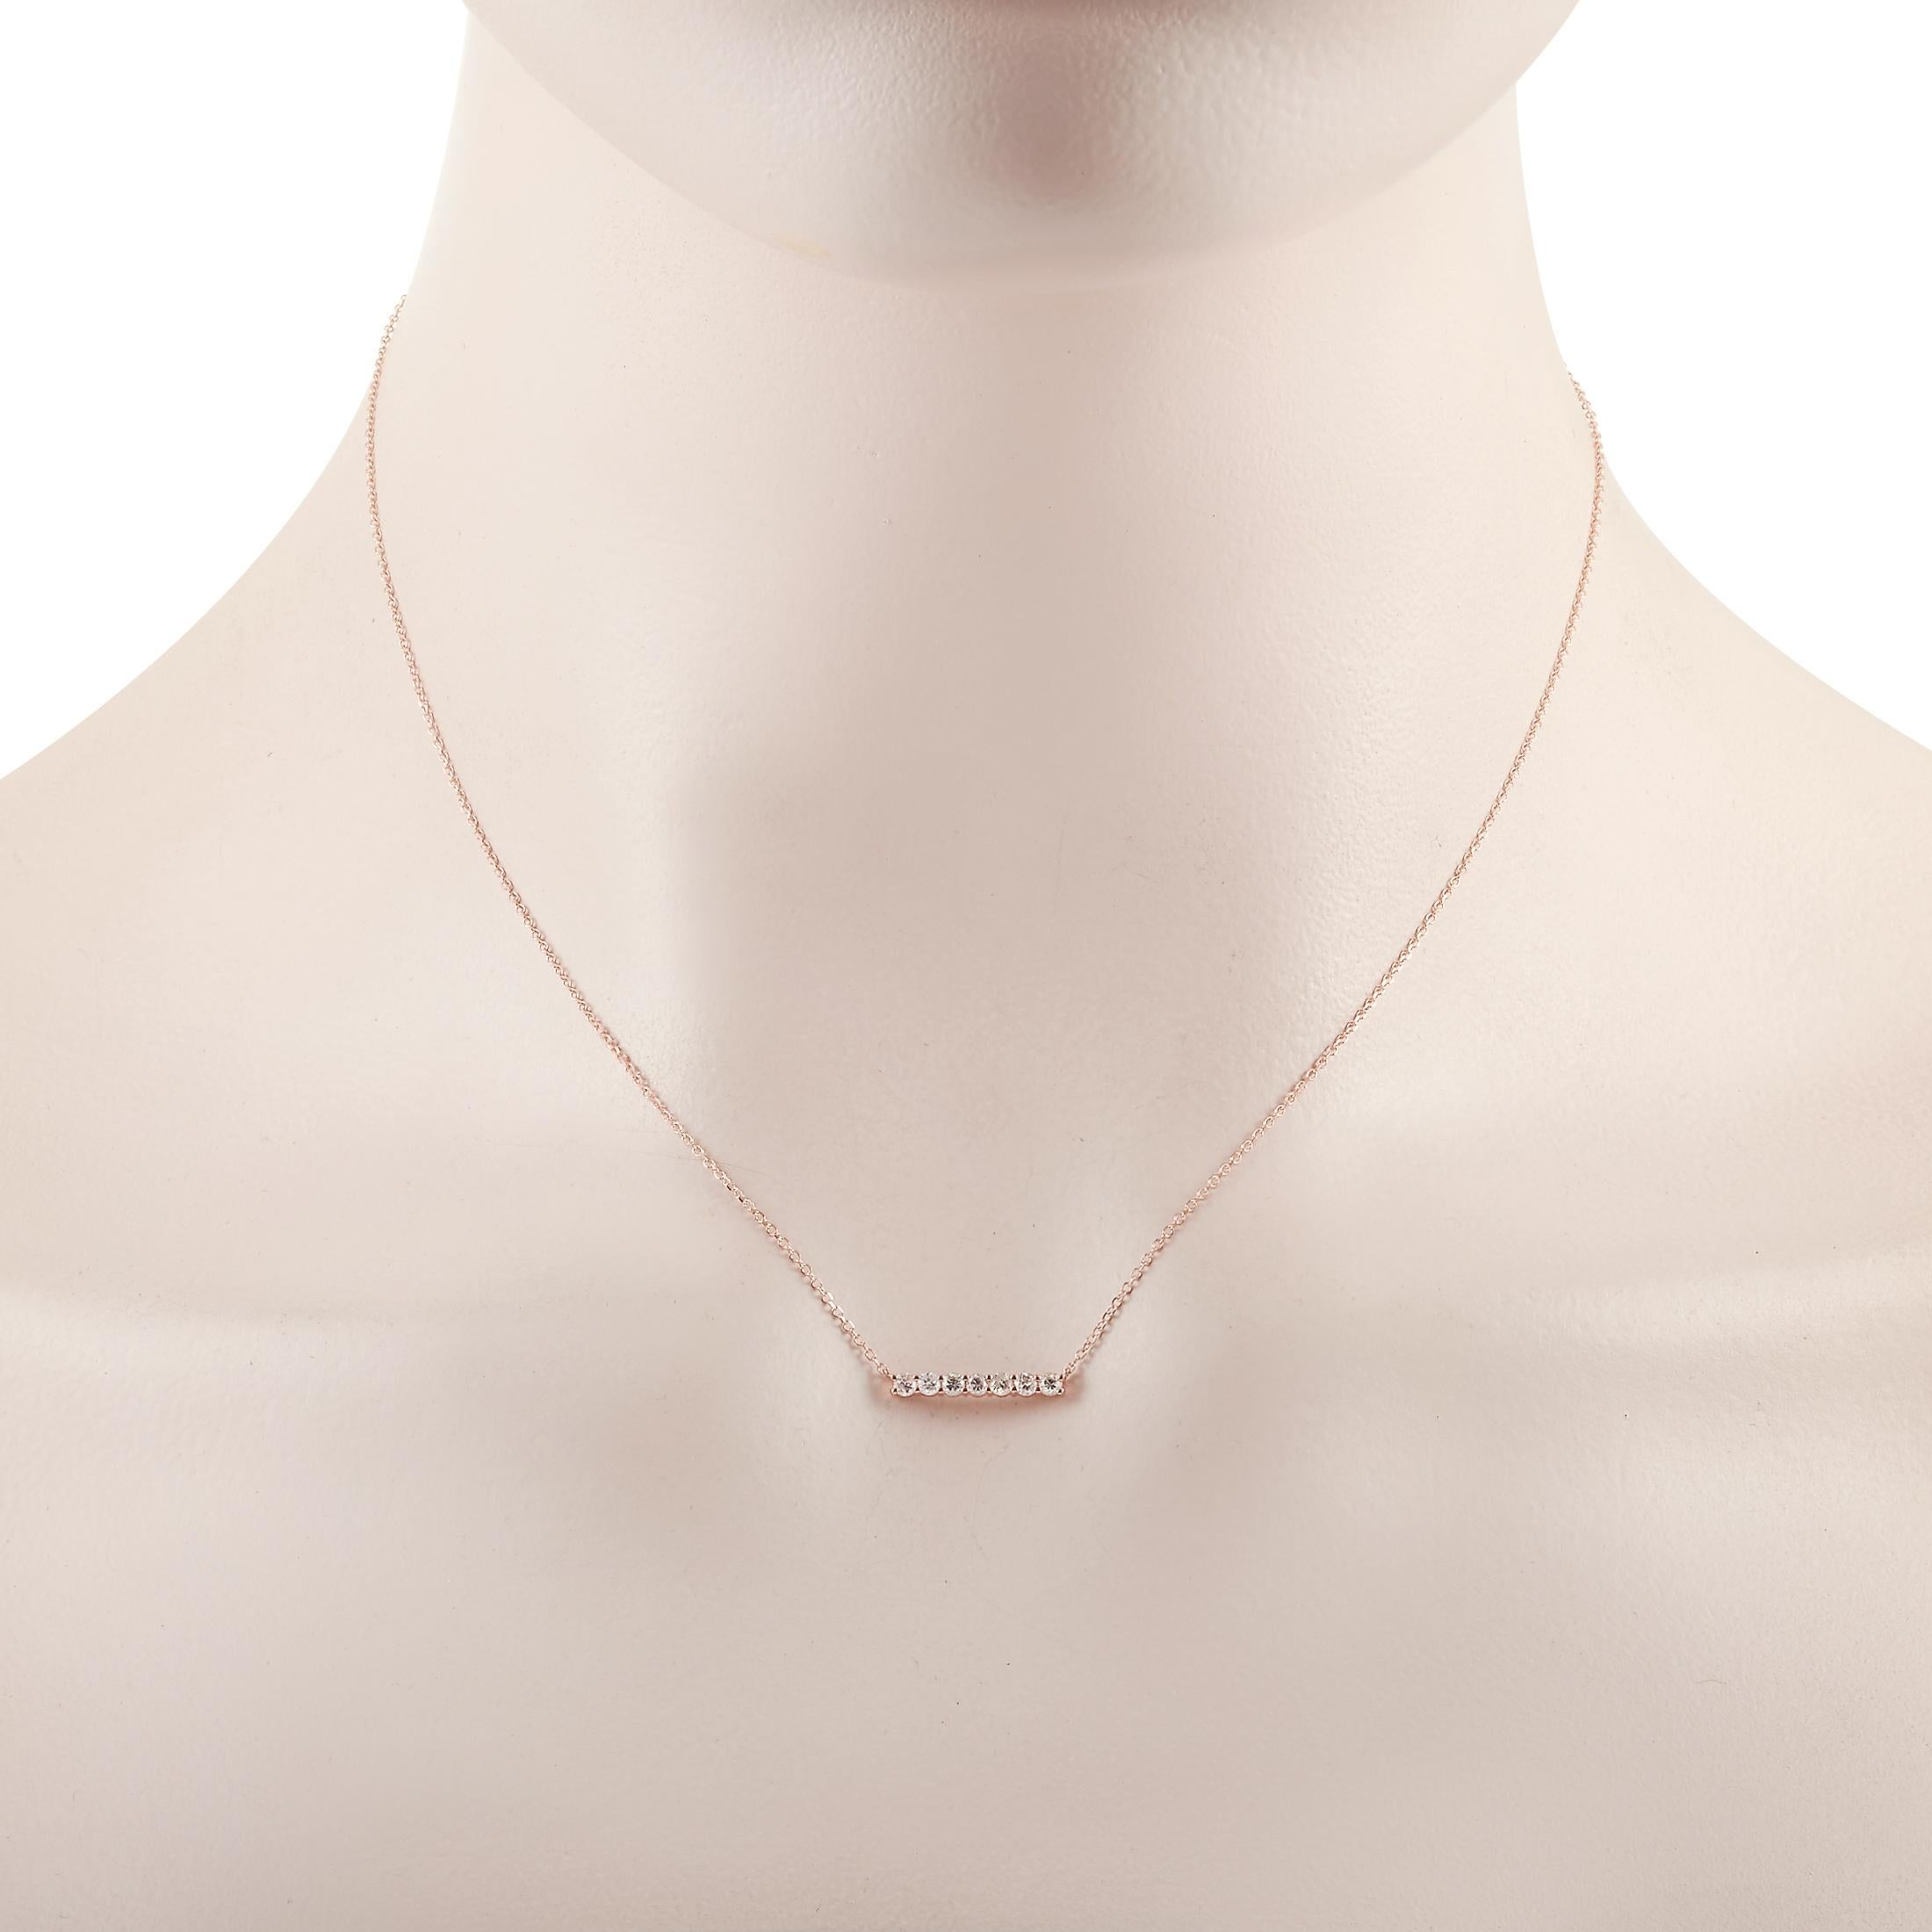 This LB Exclusive necklace is crafted from 14K rose gold and weighs 1.4 grams. It is presented with a 15” chain and boasts a pendant that measures 0.13” in length and 0.50” in width. The necklace is set with diamonds that total 0.25 carats.
 
